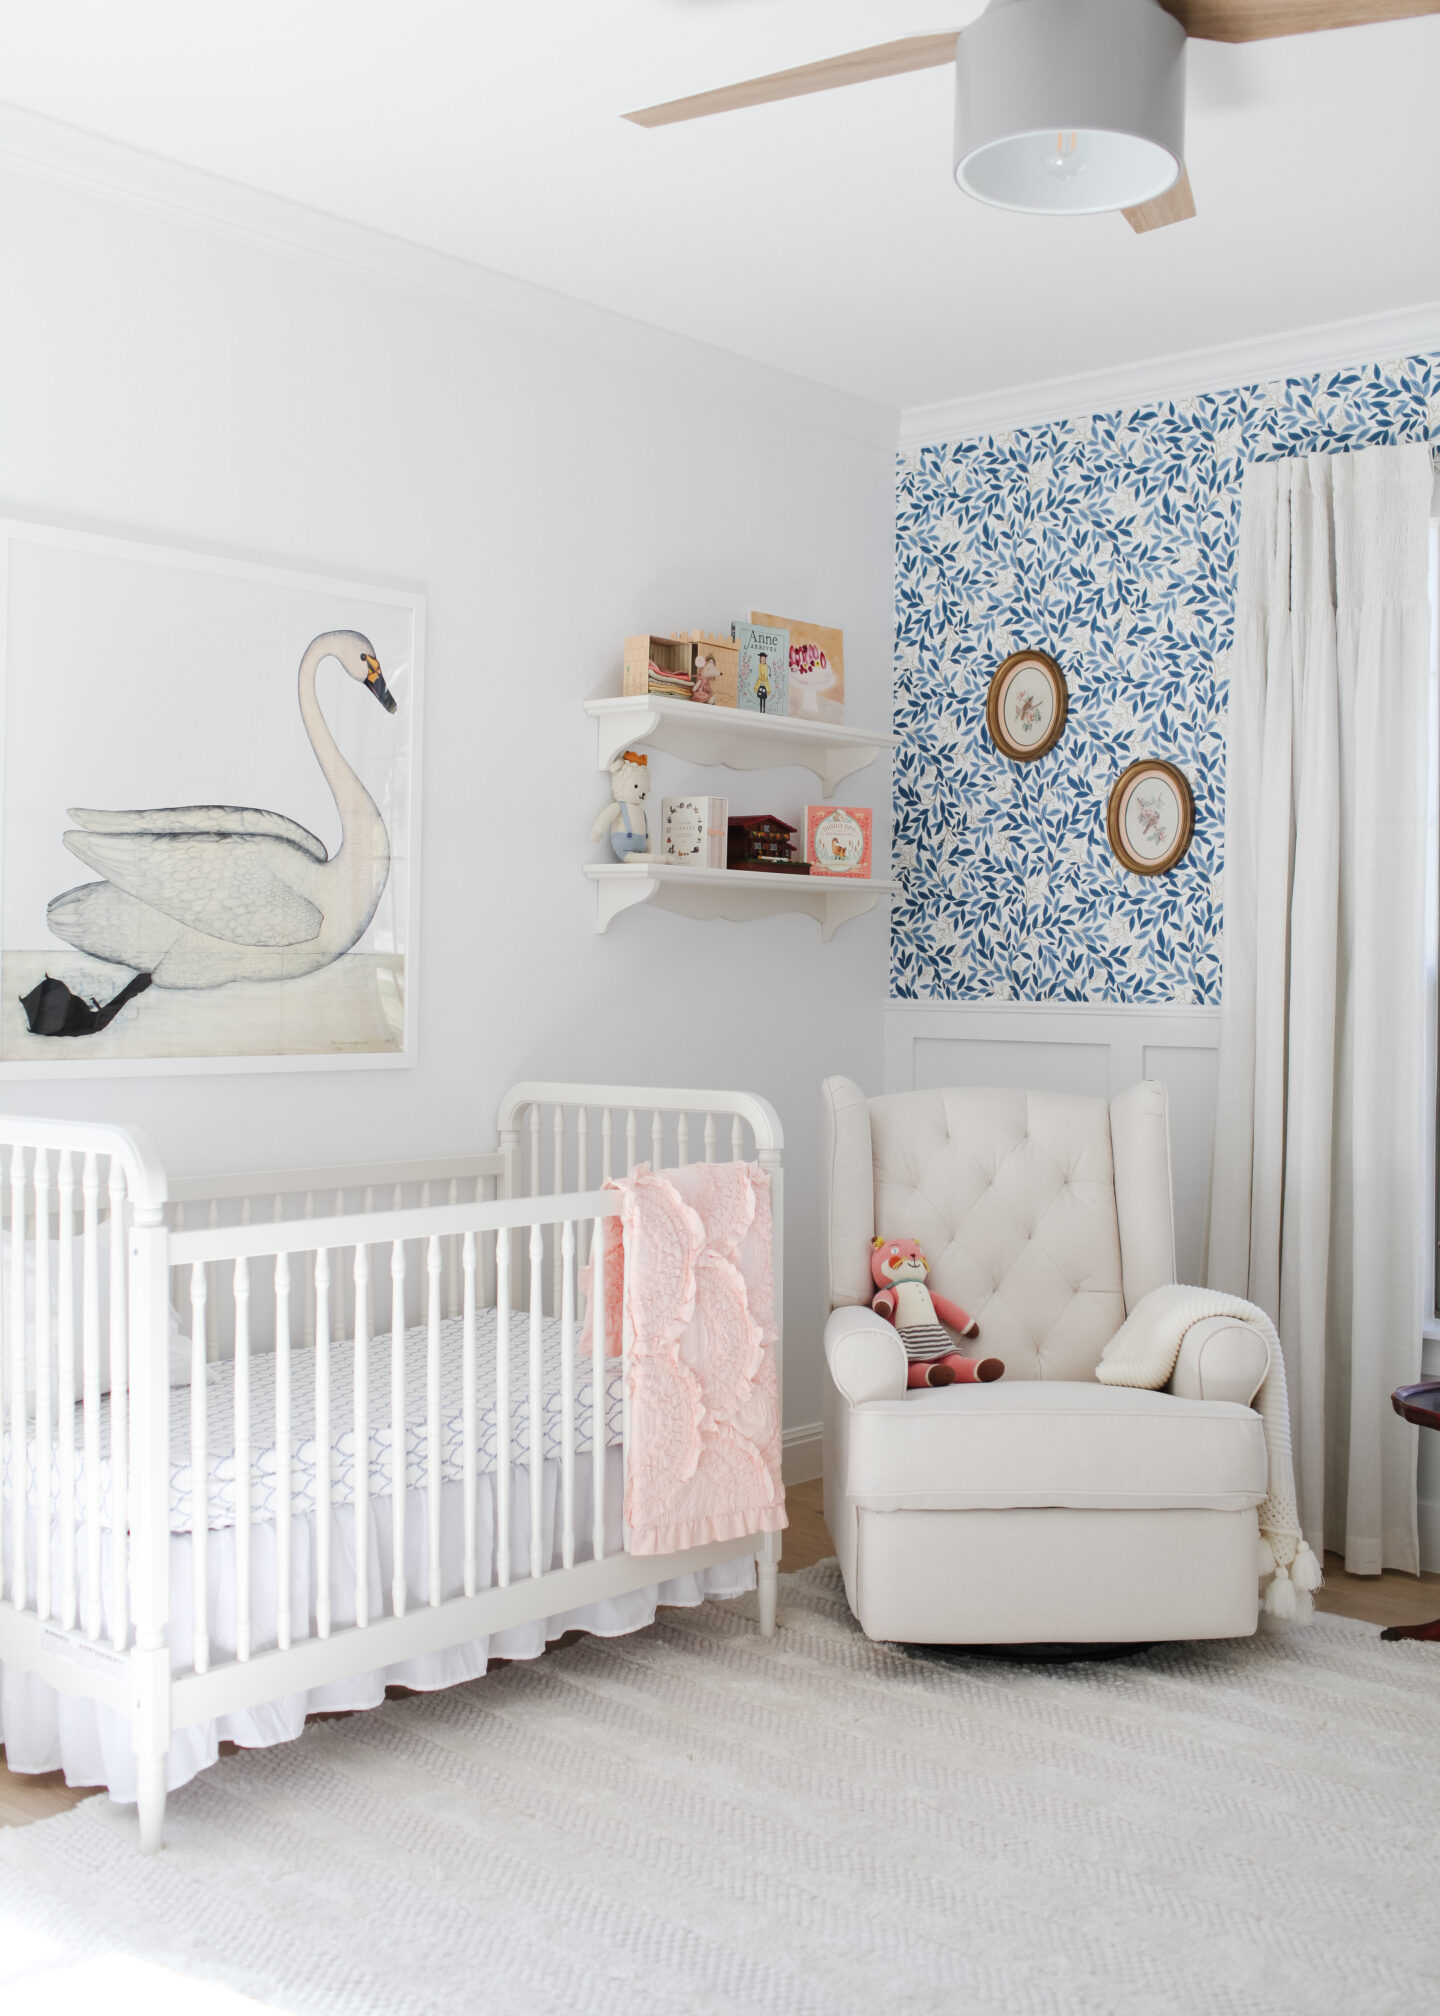 Baby girl nursery. wall decor, bedding, curtains, rugs, furniture, wallpaper, wainscoting, toys, art.